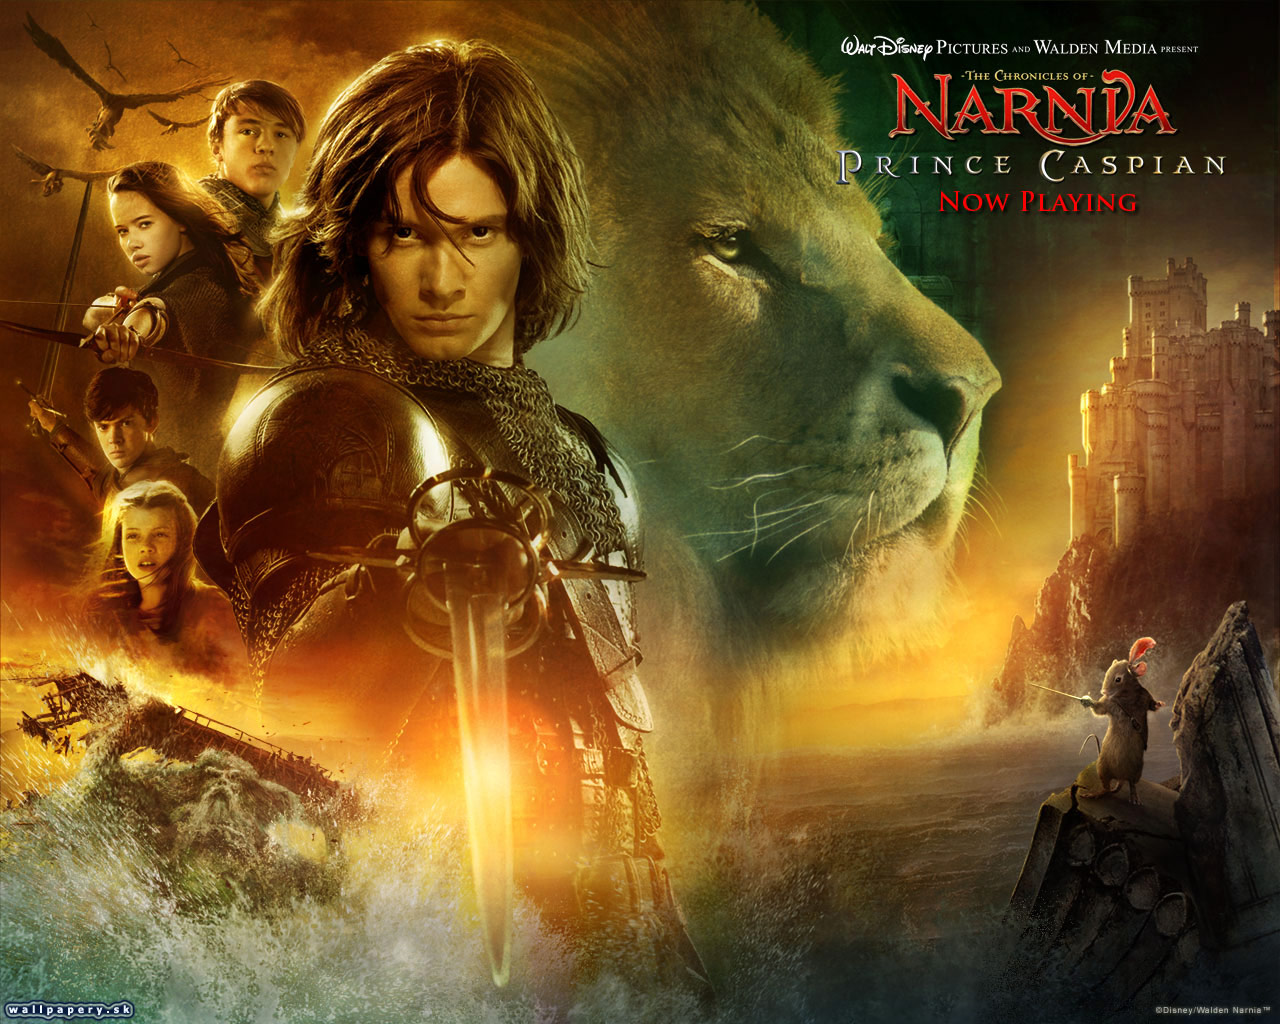 The Chronicles of Narnia: Prince Caspian - wallpaper 2